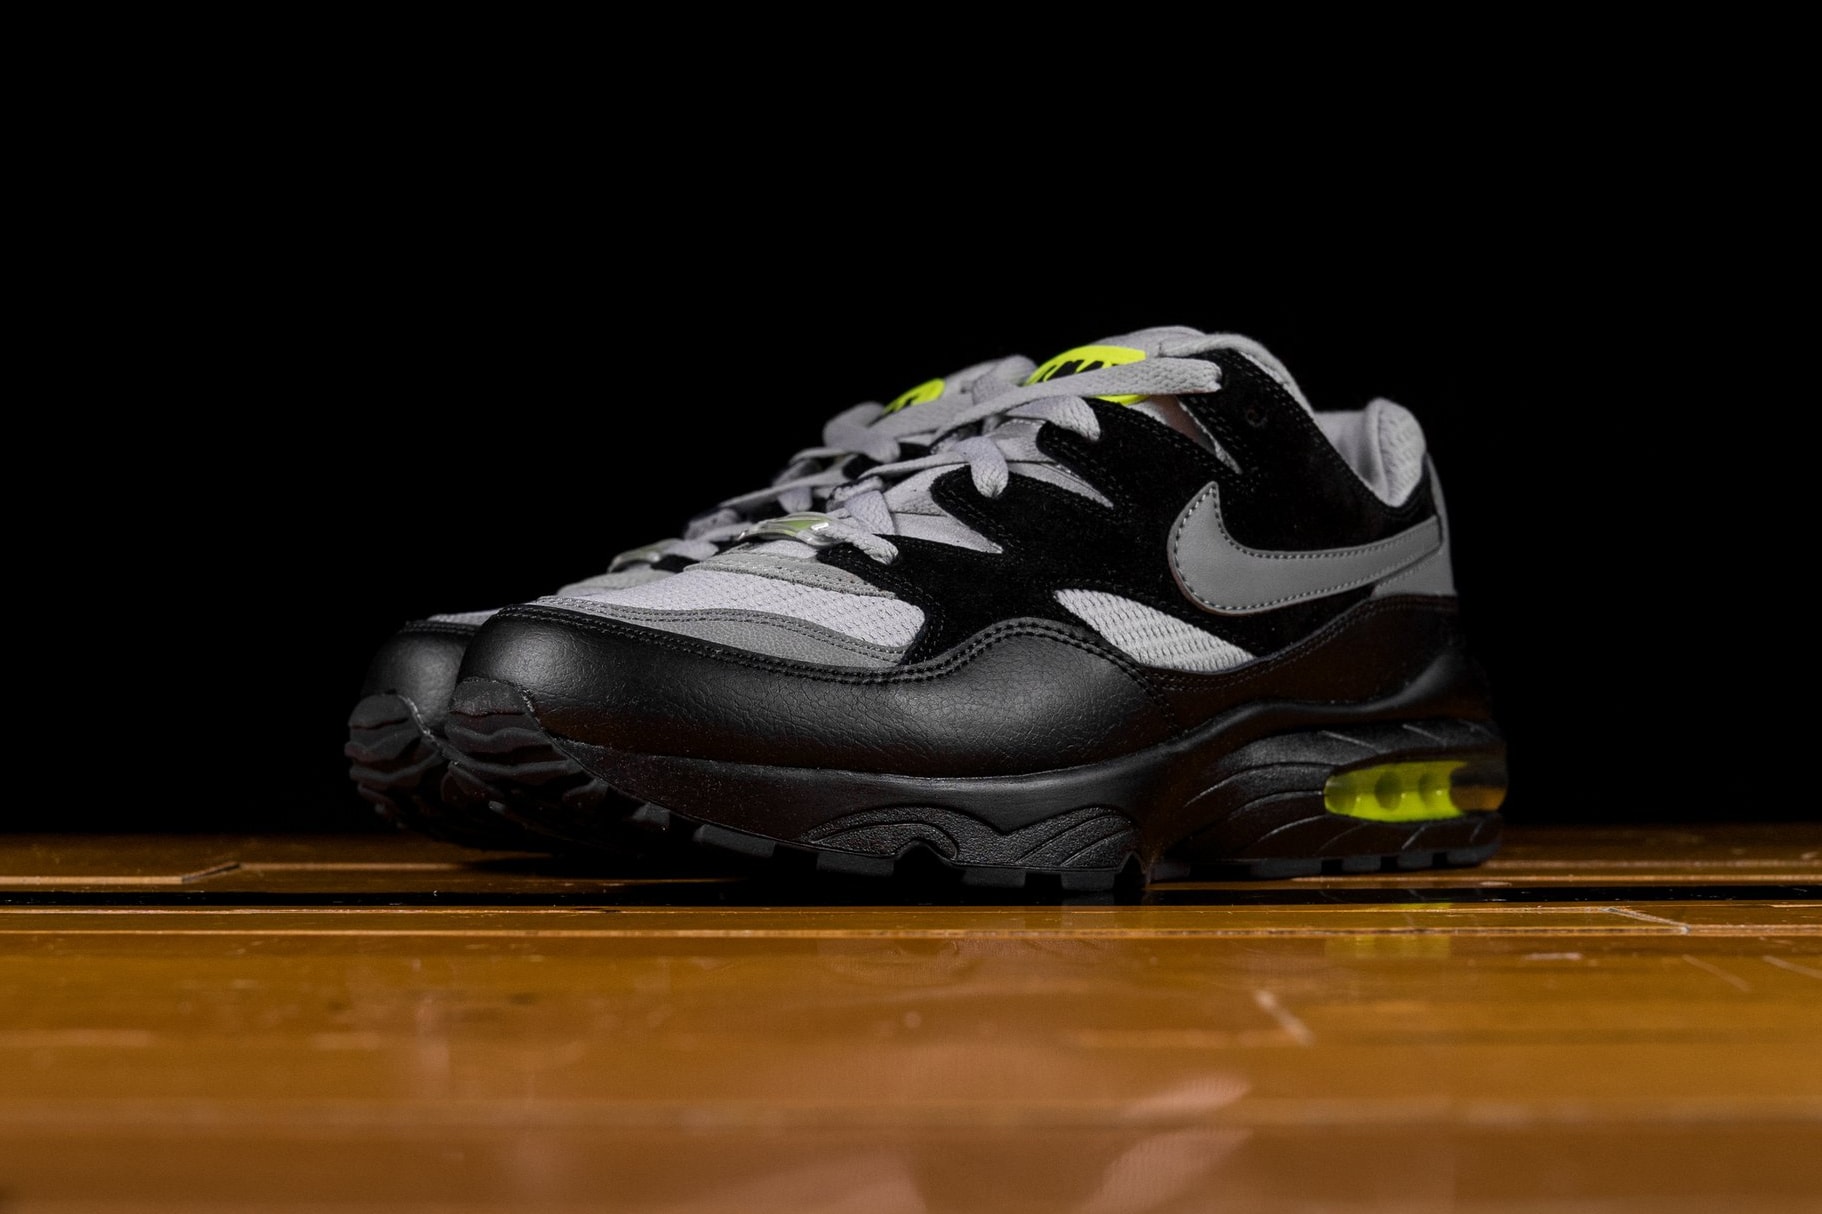 Nike Air Max 94 Wolf Grey Volt Release date info sneaker colorway available now purchase price footwear trainer